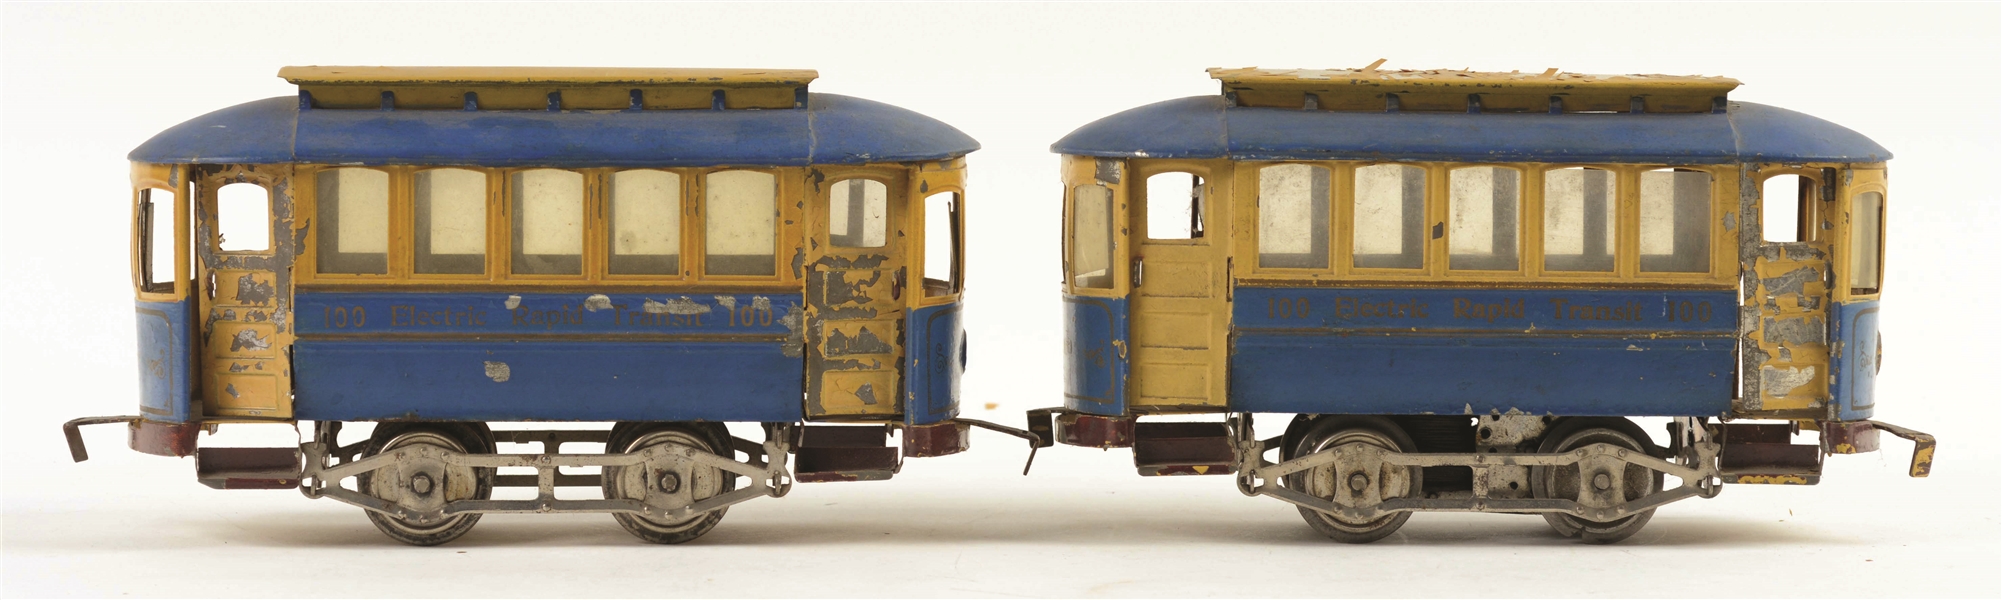 LOT OF 2: LIONEL NO. 100 ELECTRIC RAPID TRANSIT TROLLEY & TRAILER.